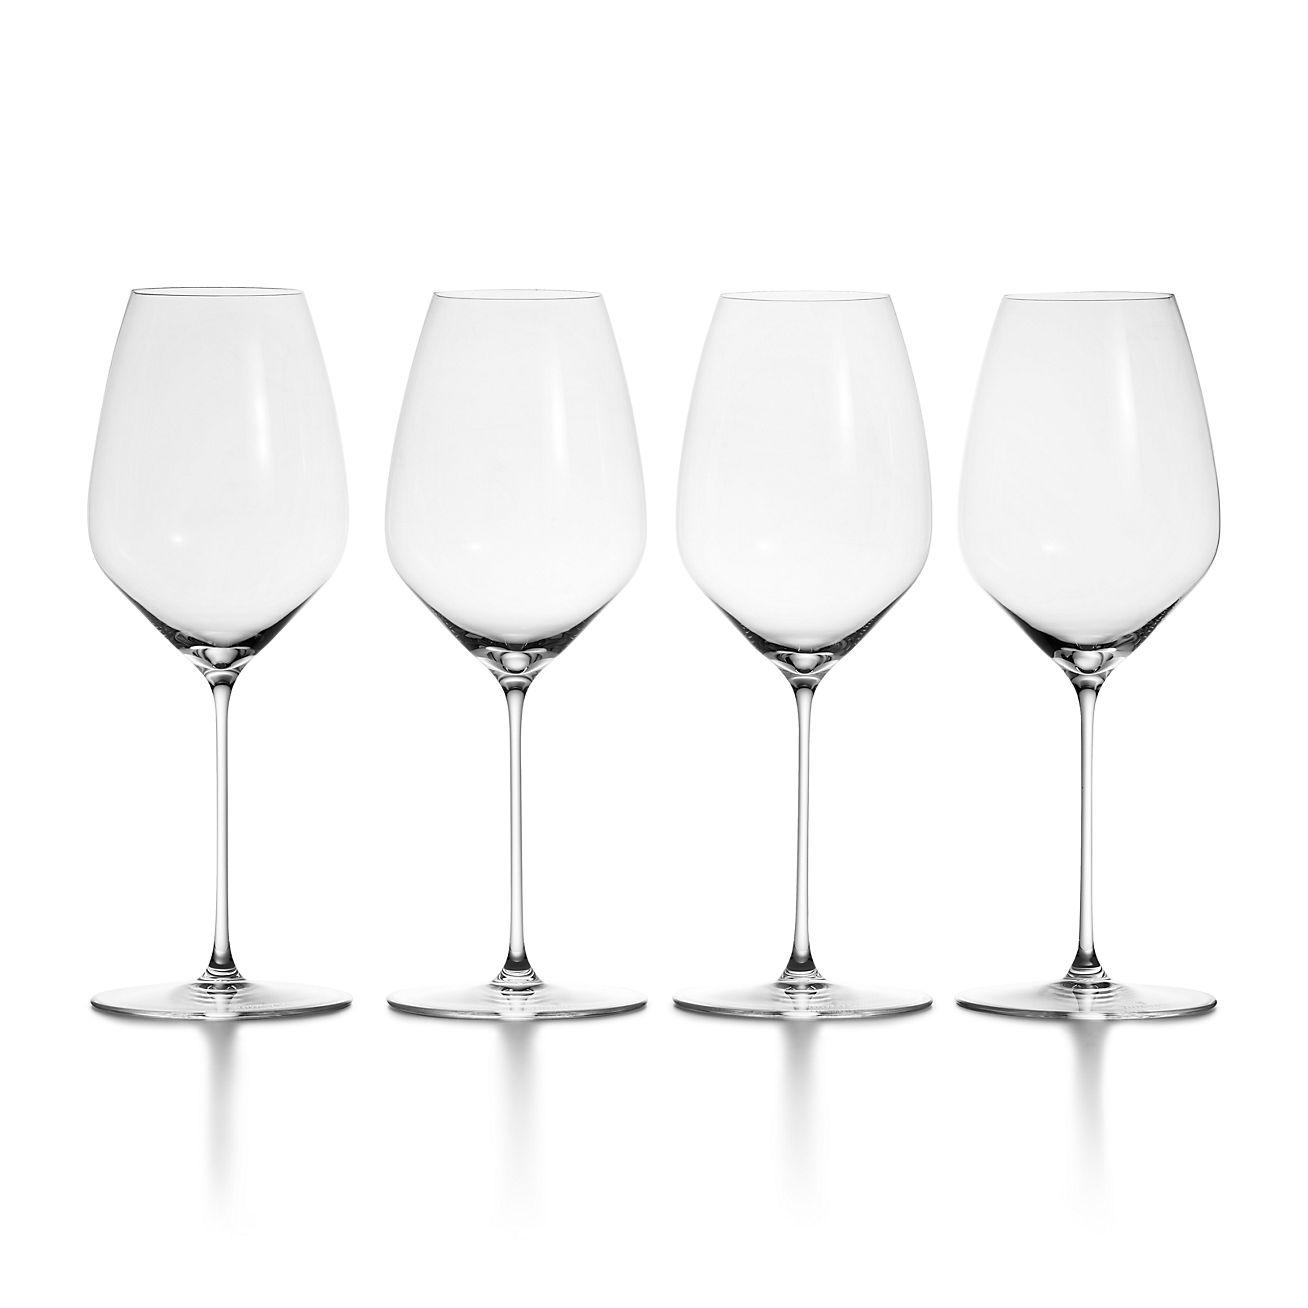 Tiffany Home Essentials Champagne Flutes in Crystal Glass, Set of